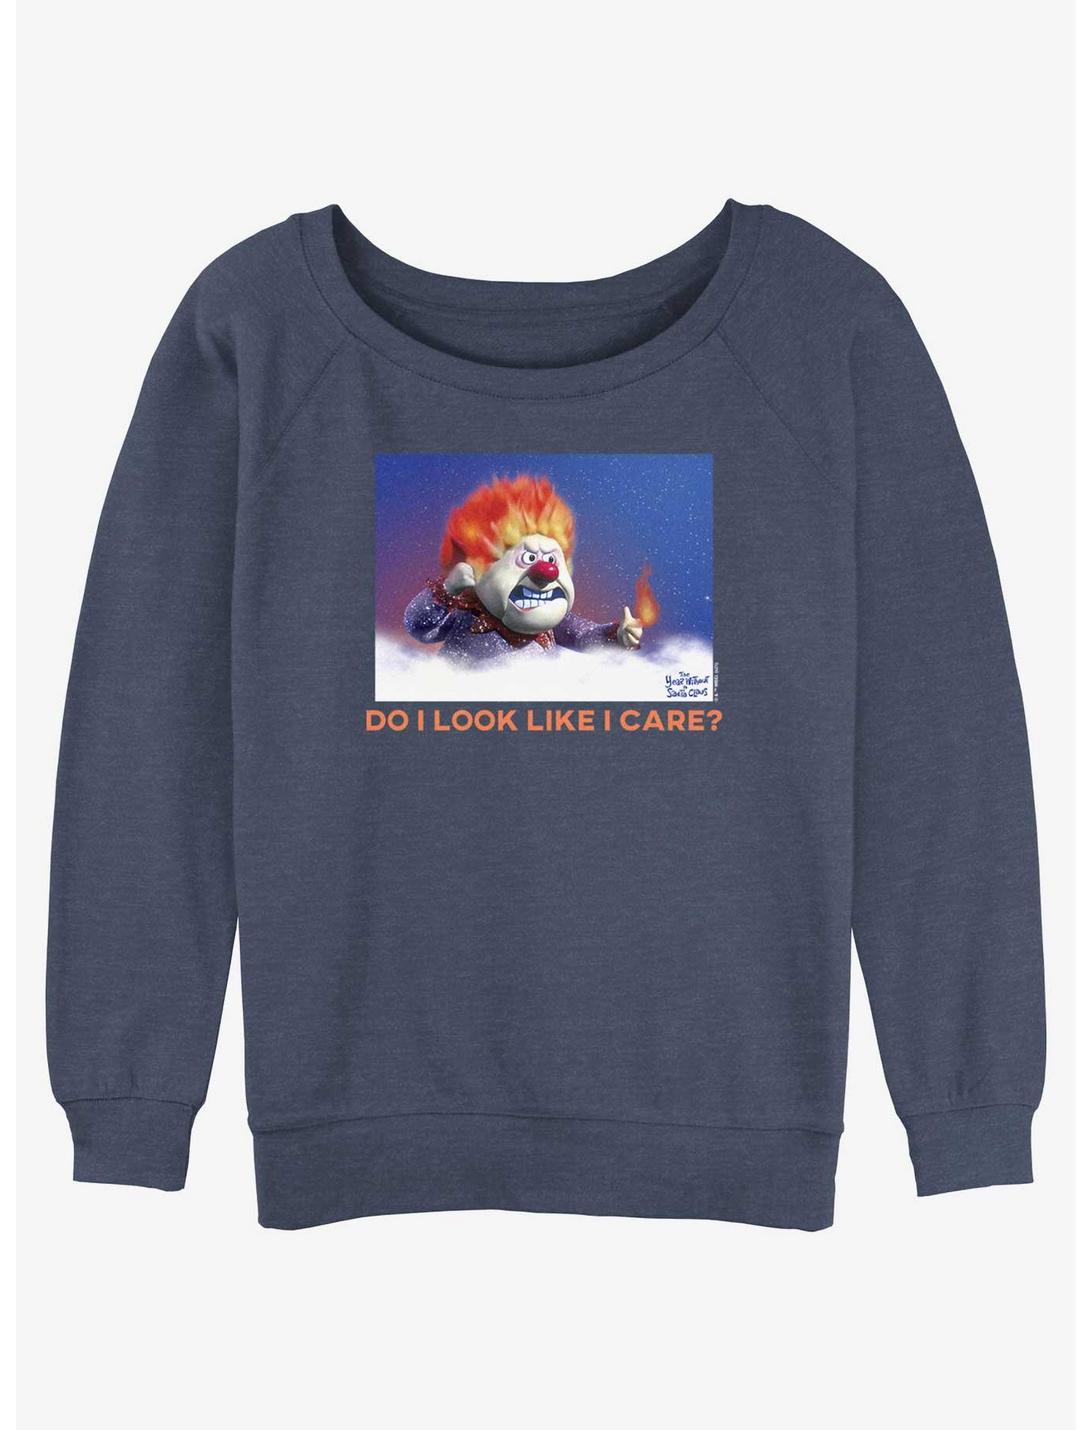 The Year Without a Santa Claus Heat Miser Do I Look Like I Care Meme Womens Slouchy Sweatshirt, BLUEHTR, hi-res